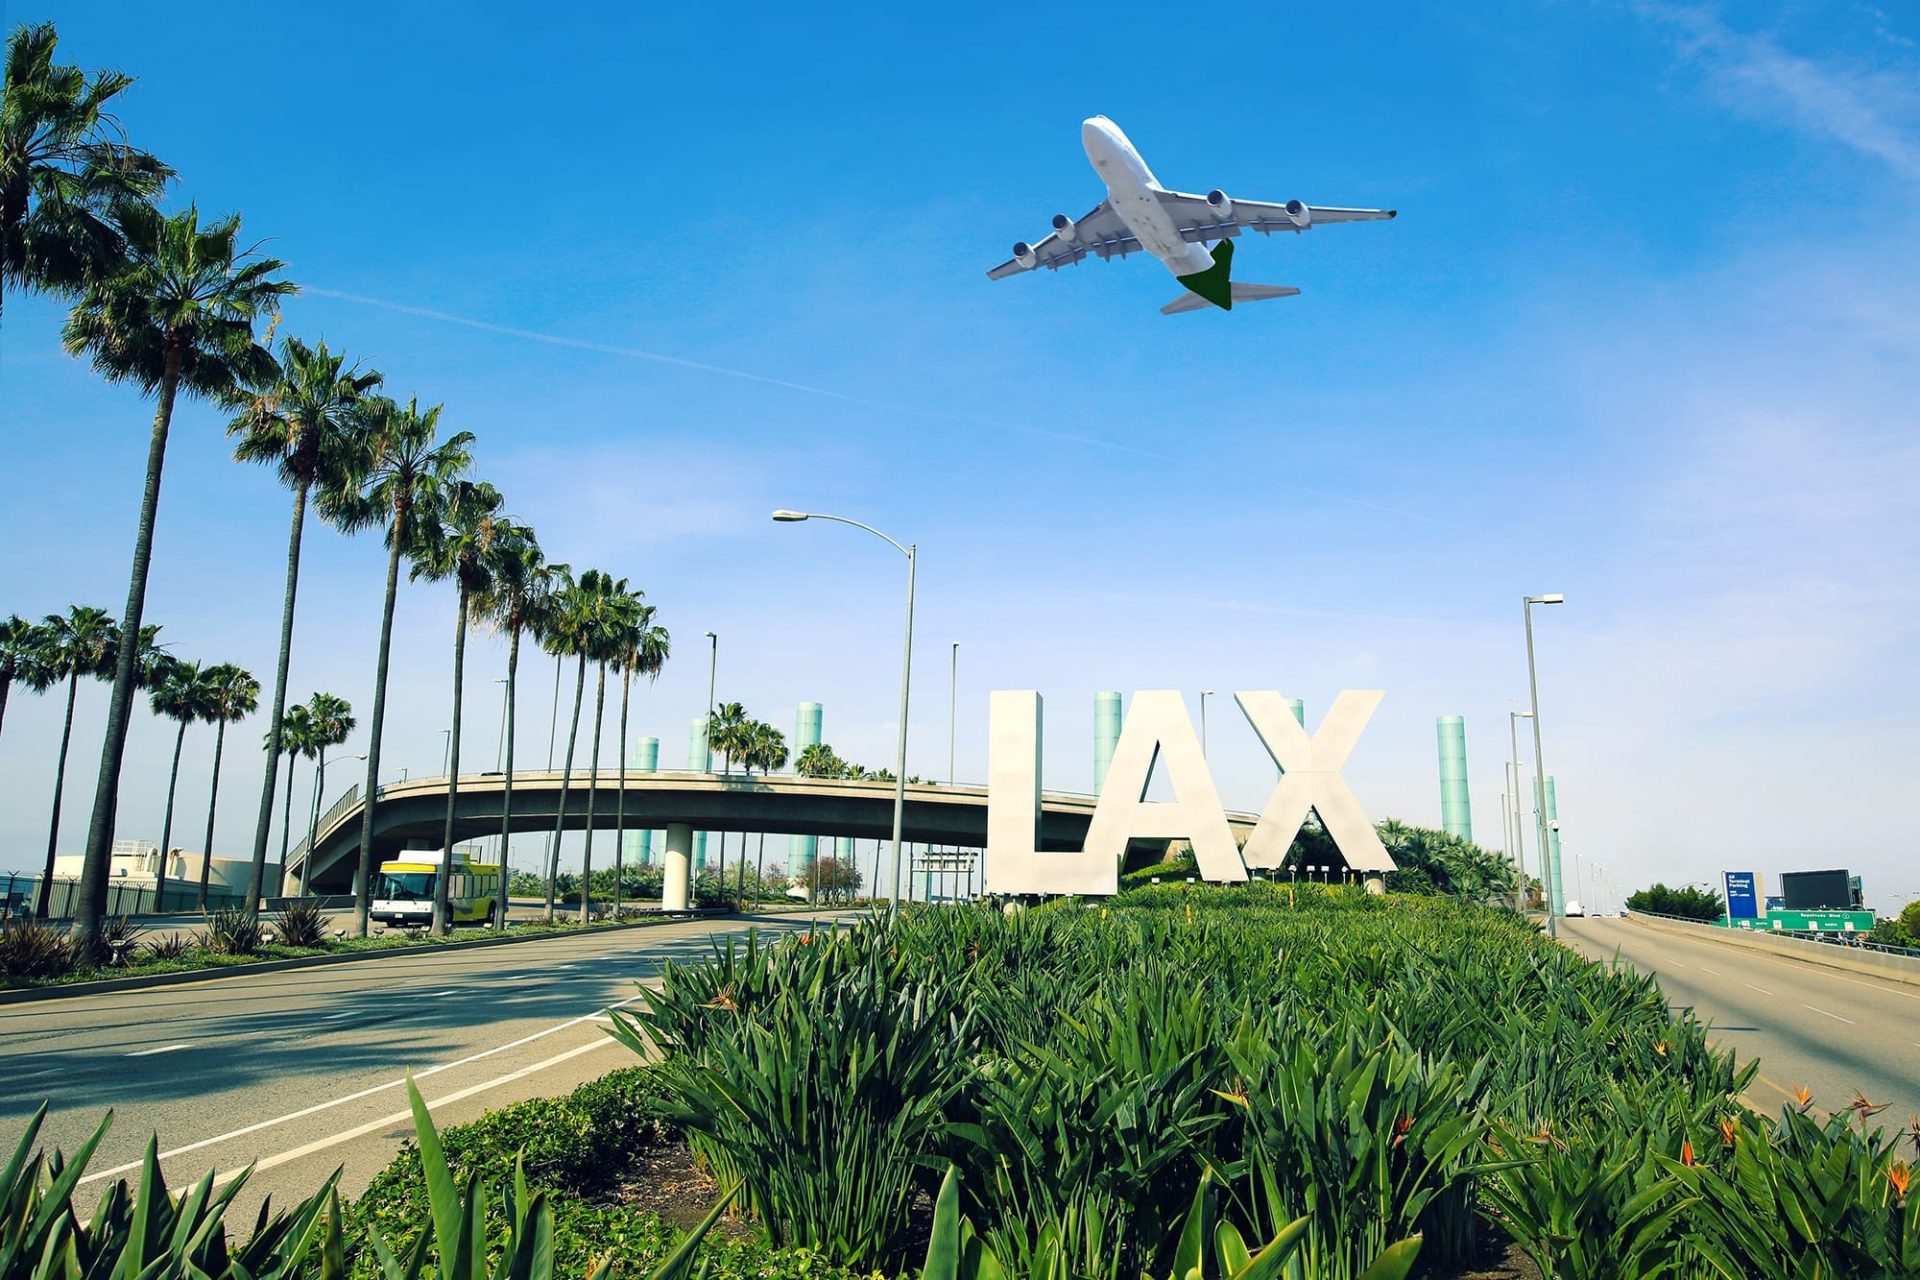 LAX expansion plans call for a new terminal east of Sepulveda Boulevard